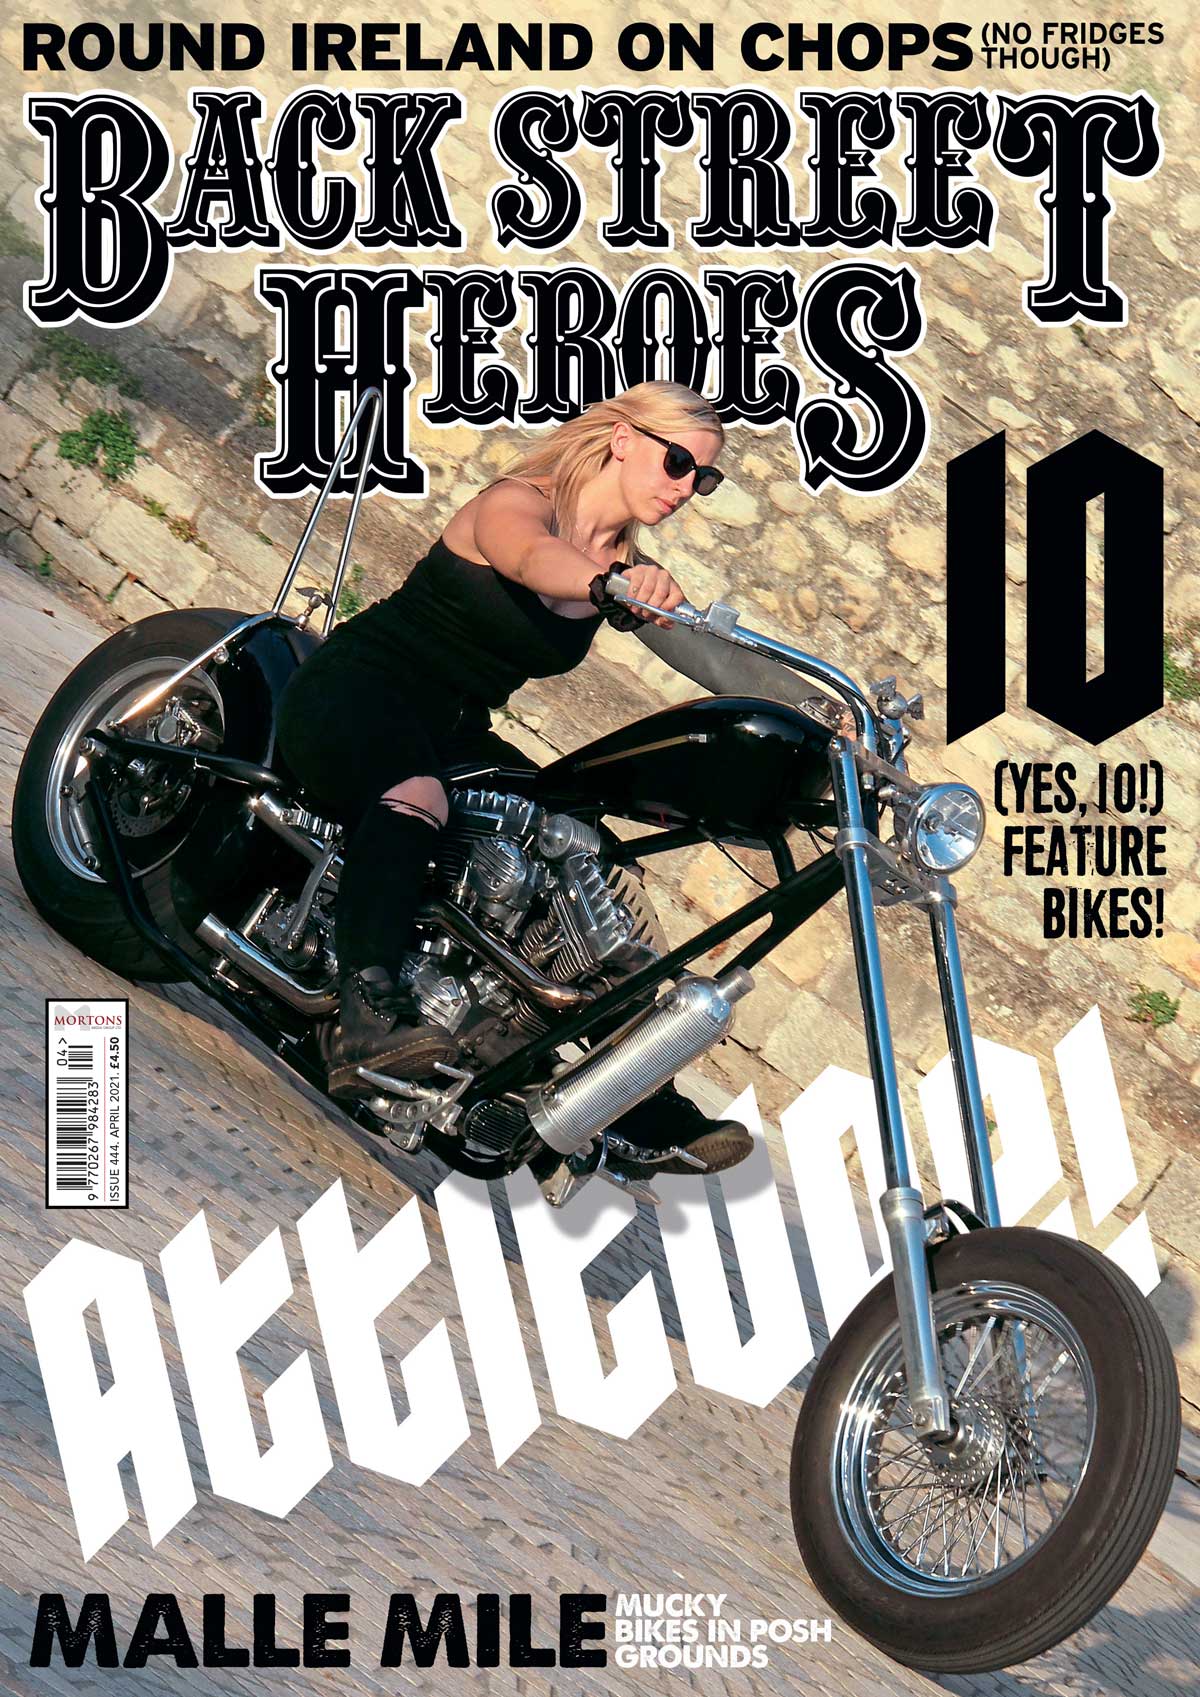 PREVIEW: April issue of Back Street Heroes magazine